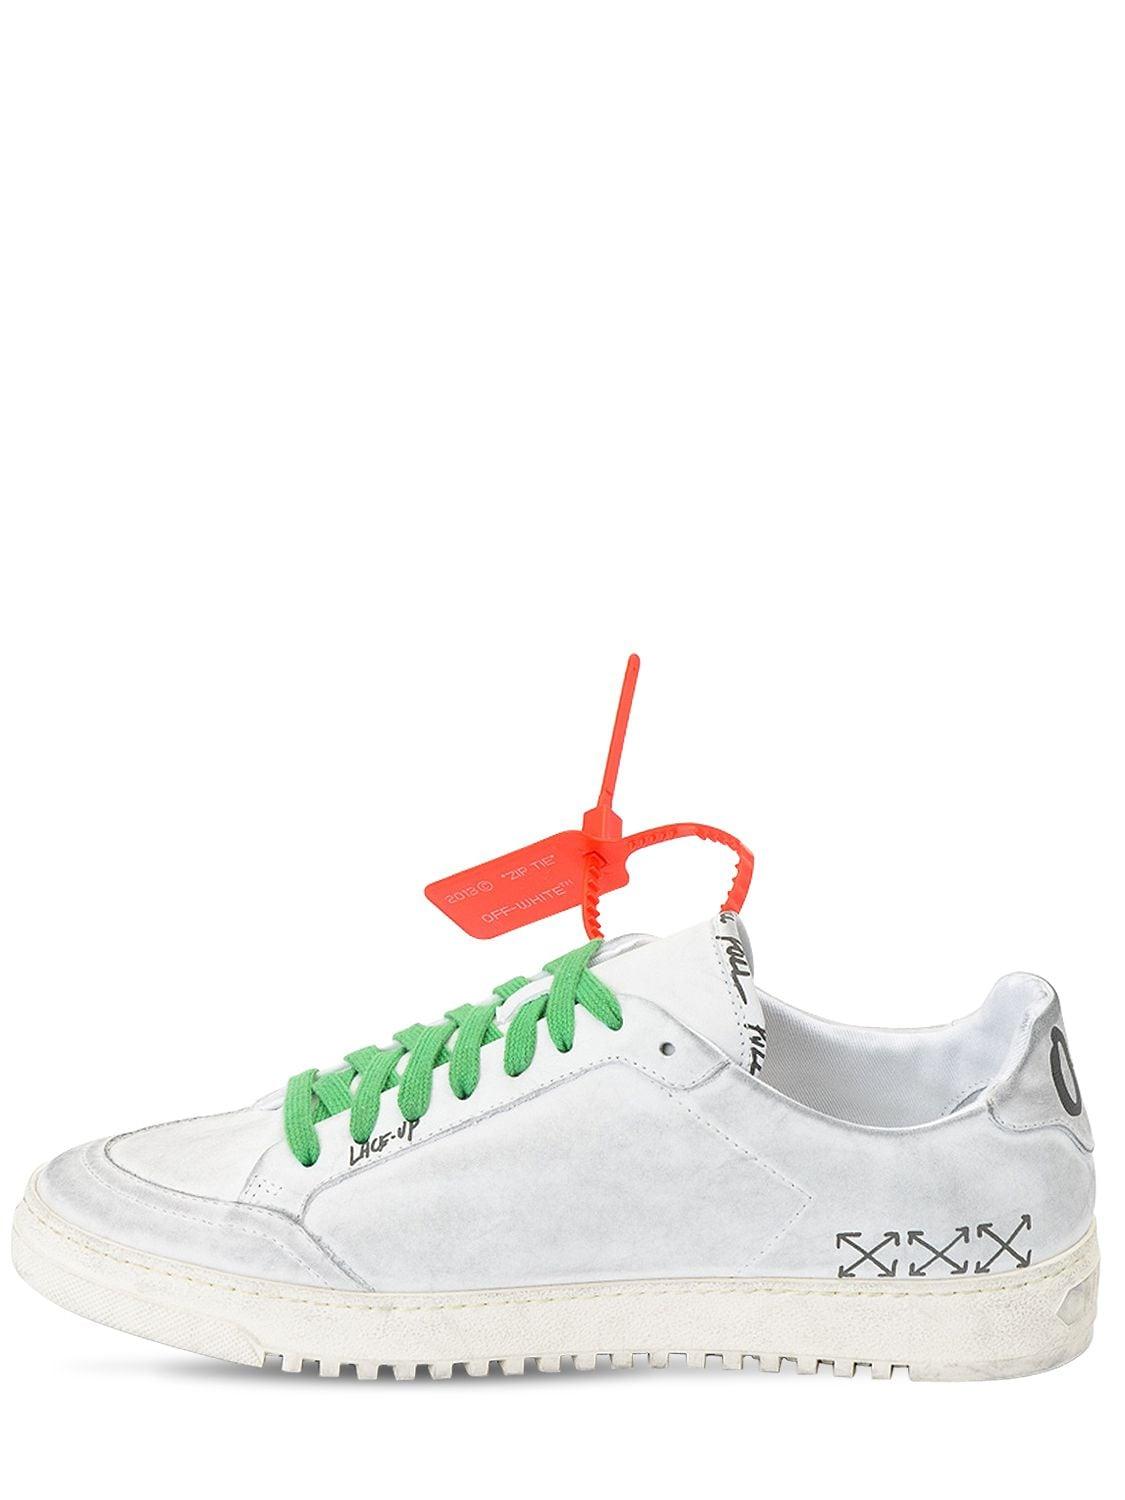 Off-White c/o Virgil Abloh Graffiti 2.0 Low-top Leather Sneakers in White  for Men | Lyst